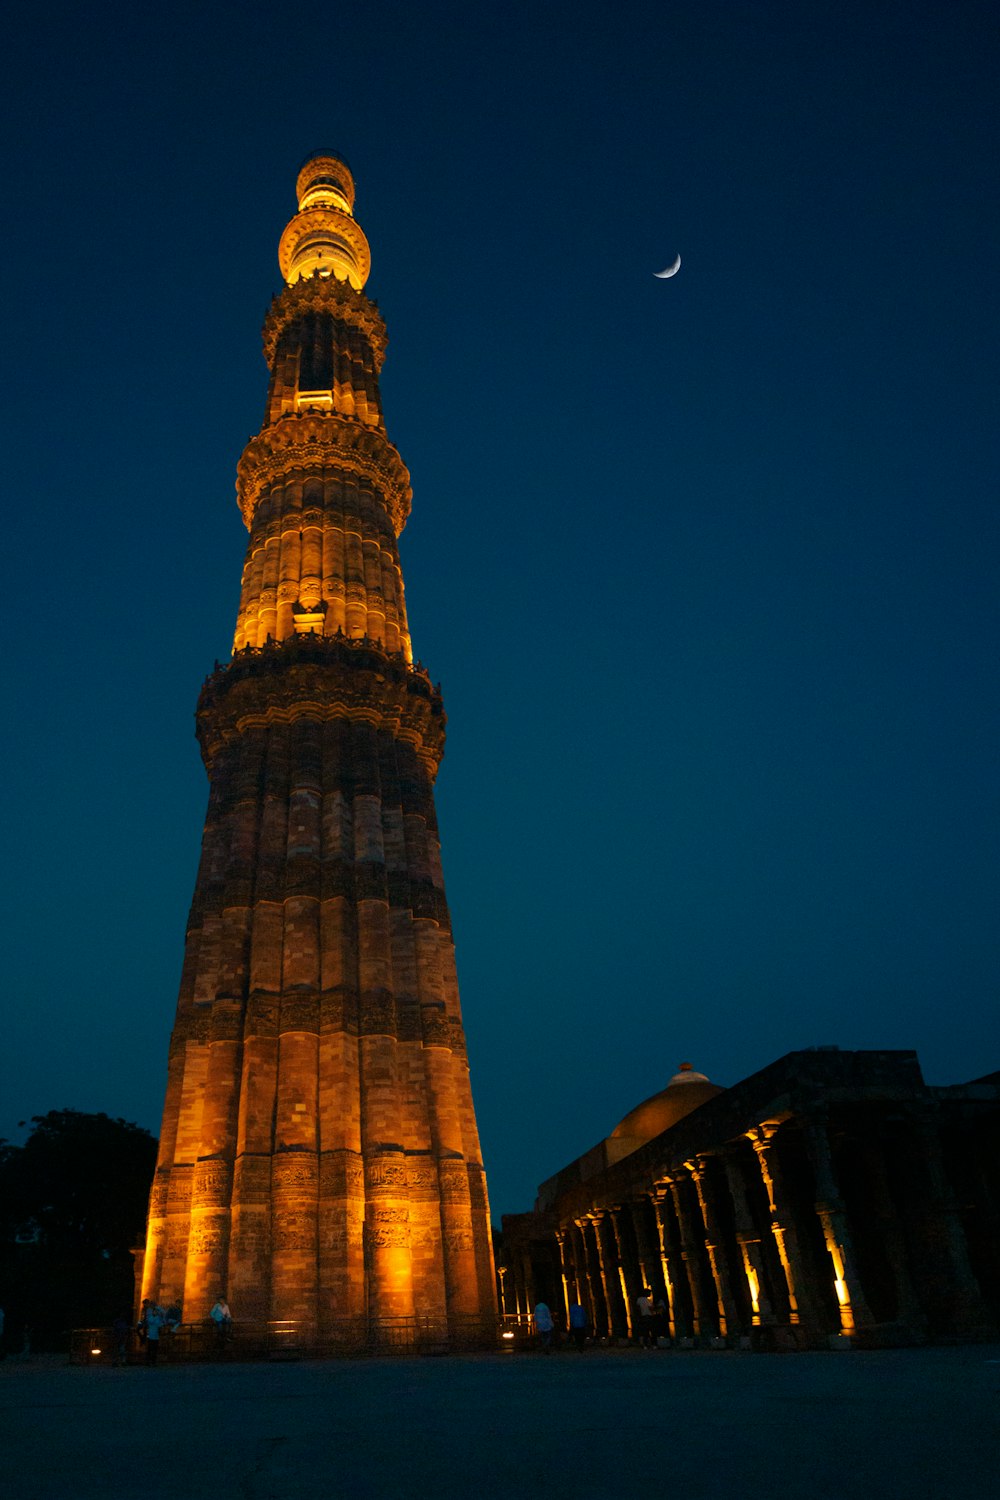 a tall tower with lights at night with Qutub Minar in the background